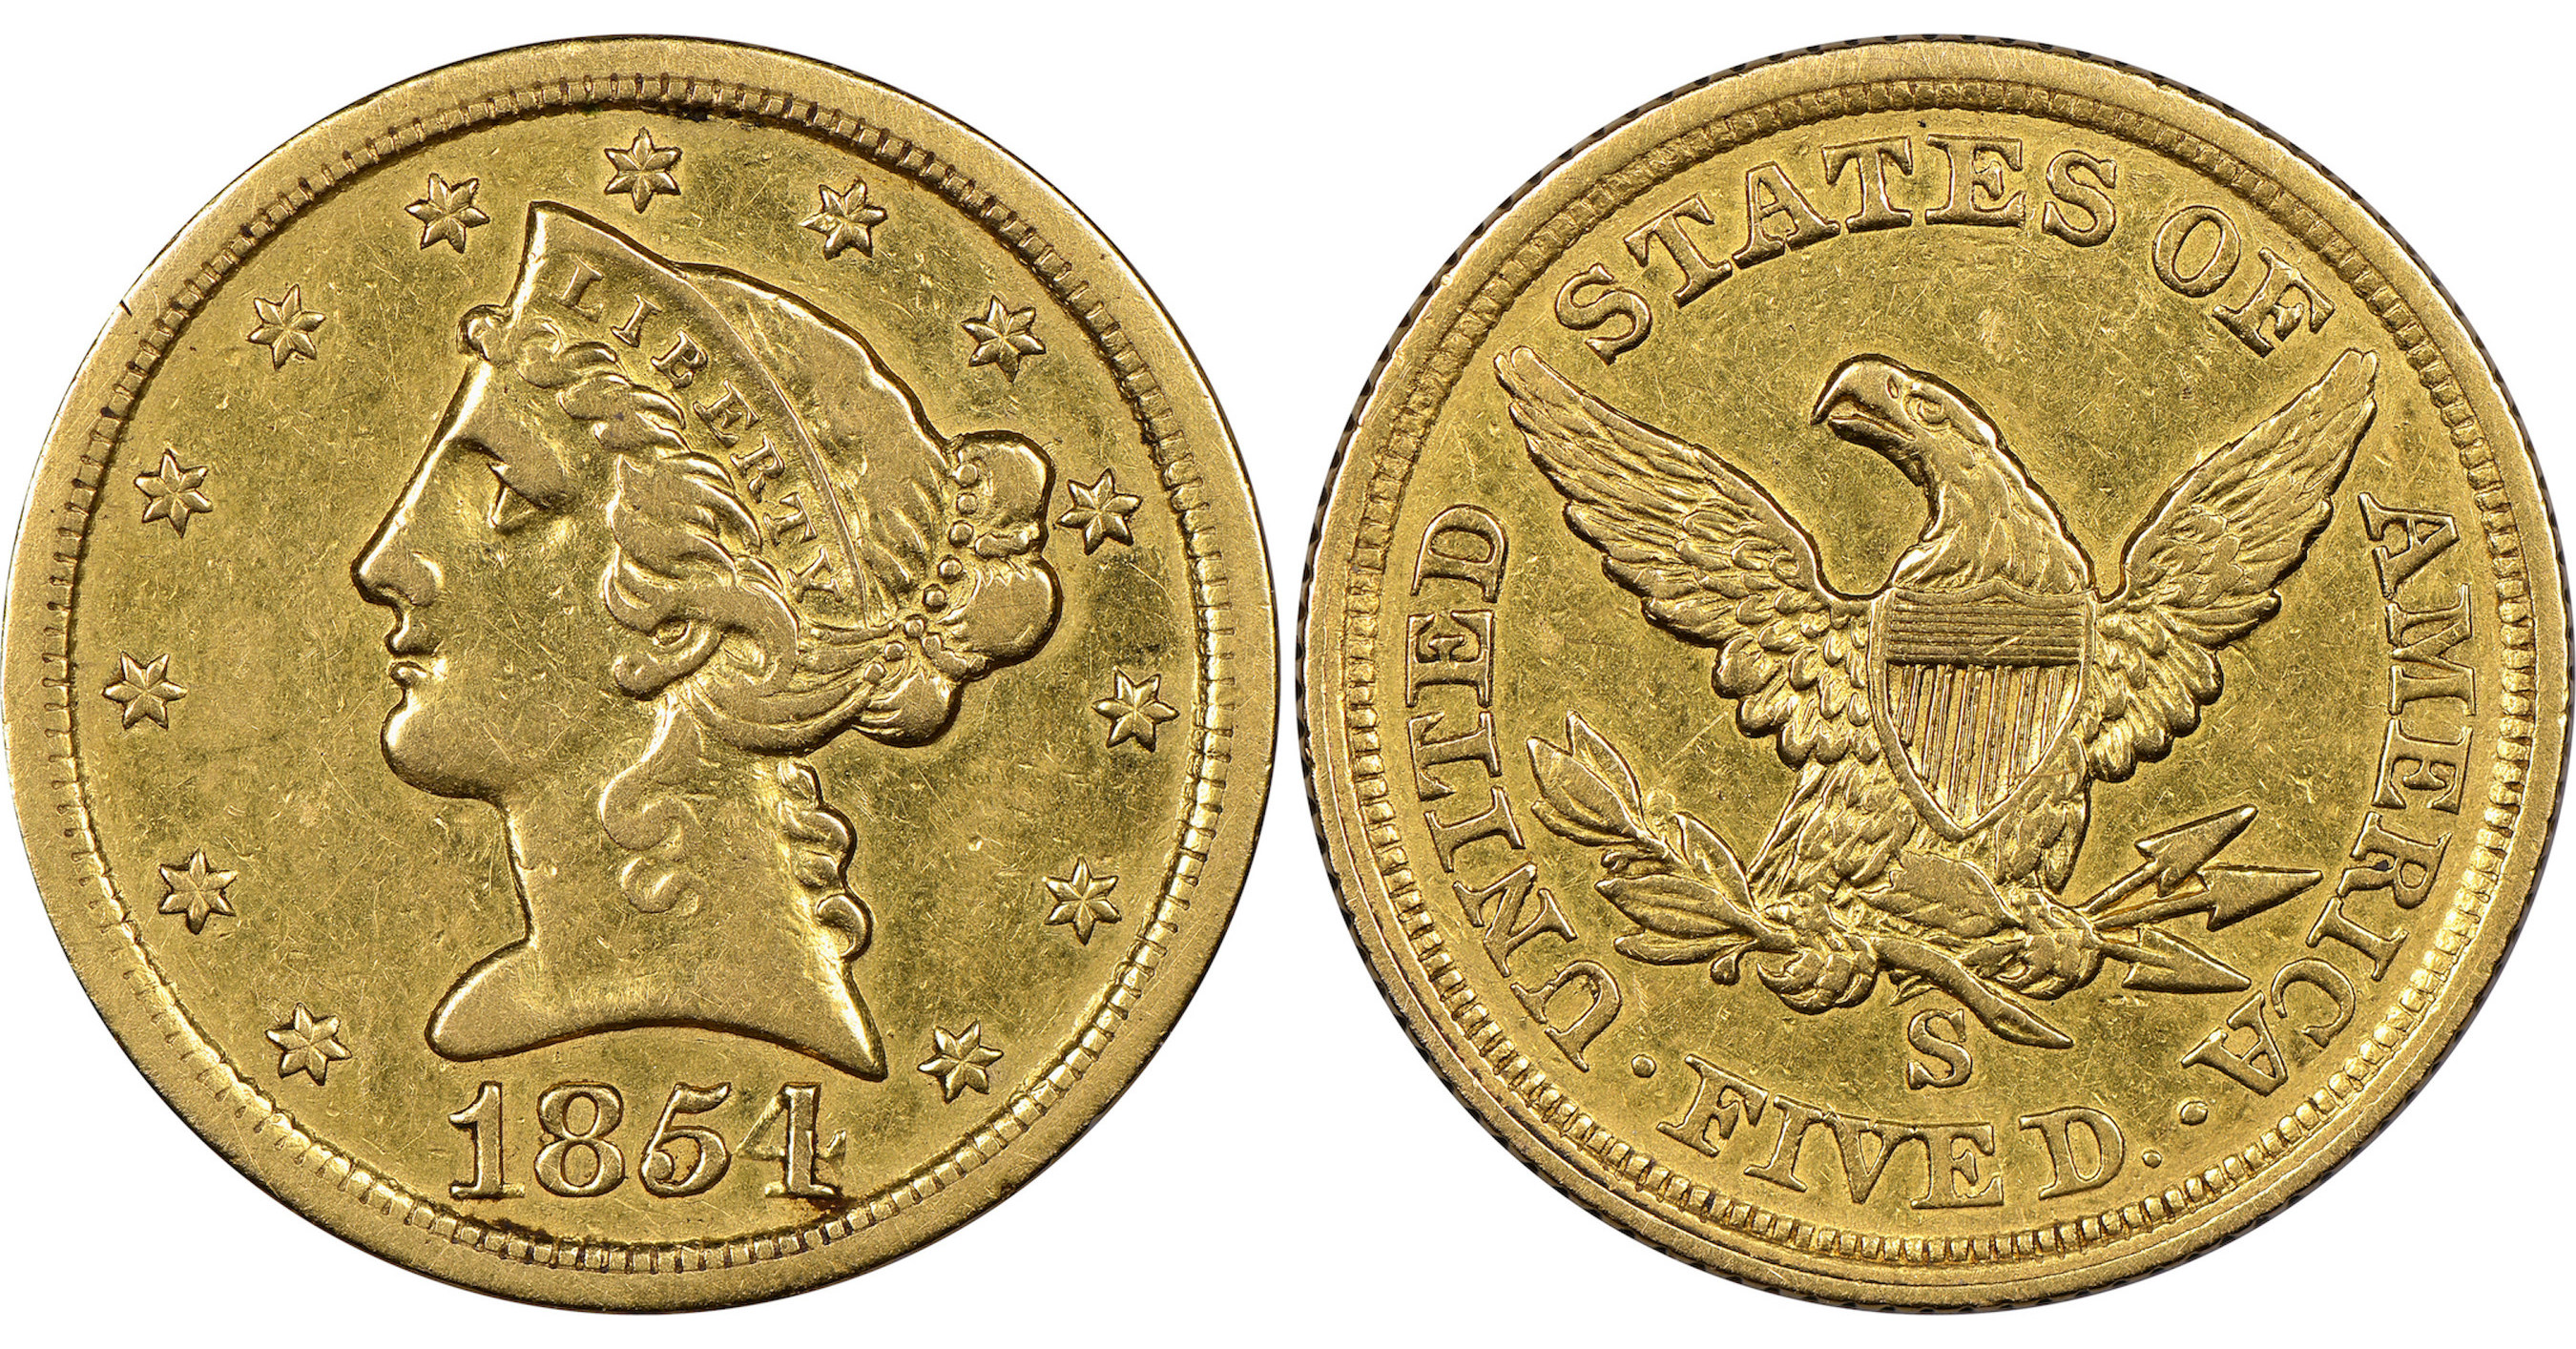 Sarasota's Numismatic Guaranty Co. graded coins that sold at